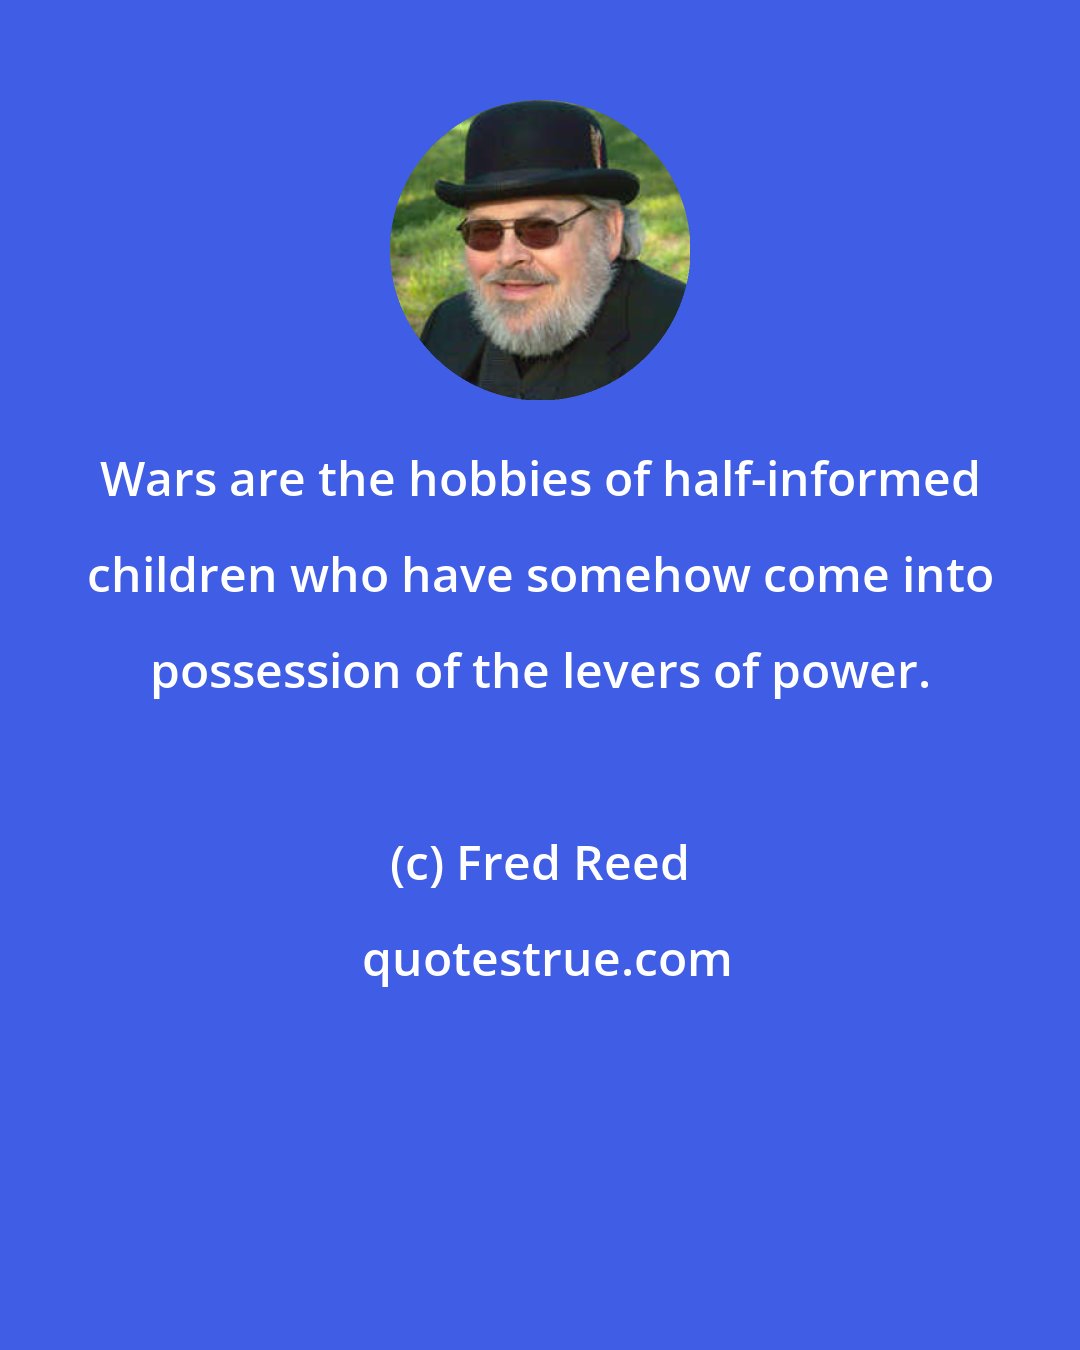 Fred Reed: Wars are the hobbies of half-informed children who have somehow come into possession of the levers of power.